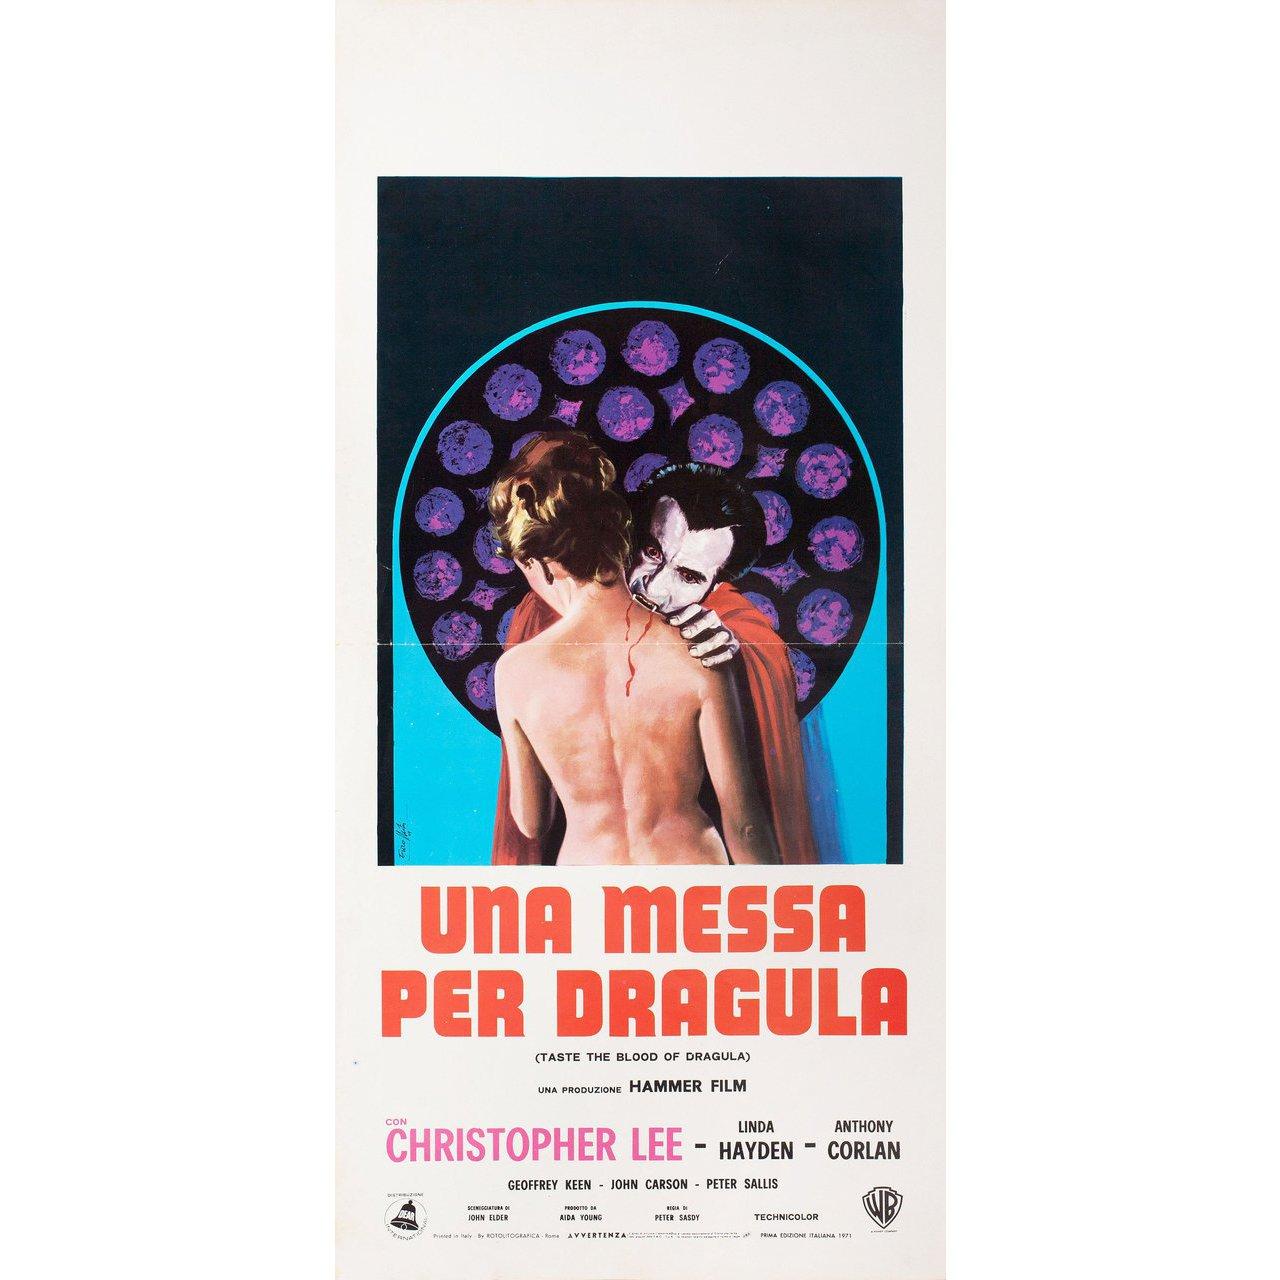 Original 1971 Italian locandina poster by Enzo Nistri for the film “Taste the Blood of Dracula” directed by Peter Sasdy with Christopher Lee / Geoffrey Keen / Gwen Watford / Linda Hayden. Very good-fine condition, folded. Many original posters were